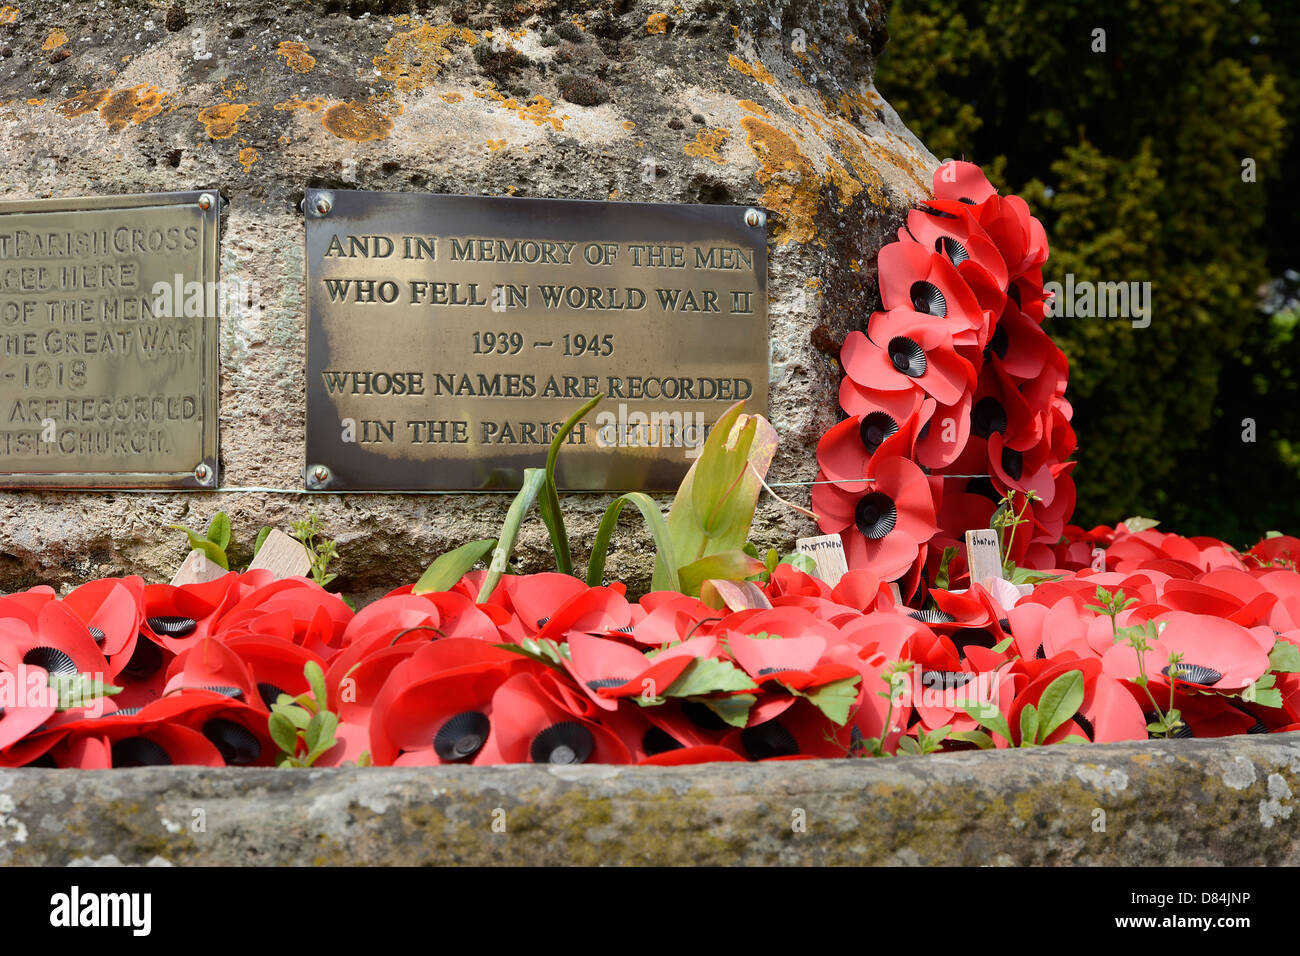 poppy-wreathes-on-an-english-town-war-memorial-for-members-of-the-D84JNP.jpg